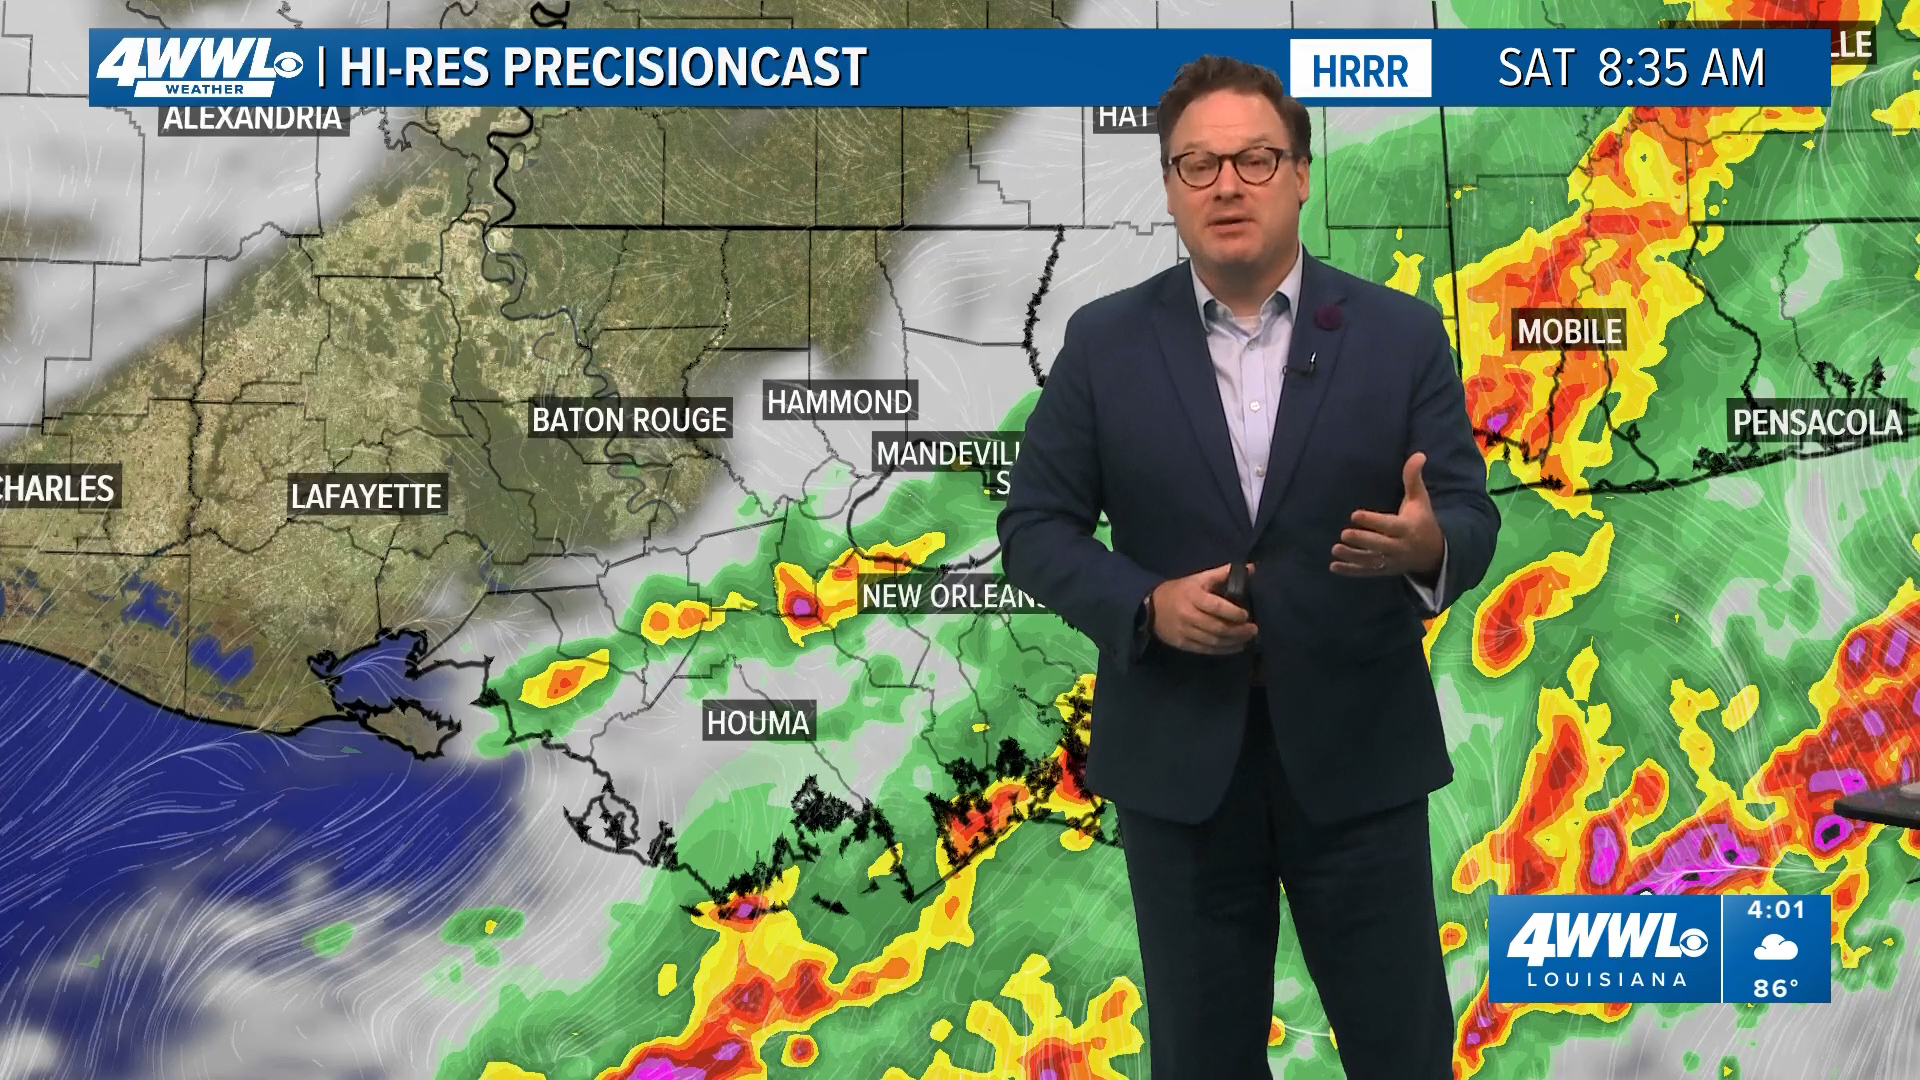 WWL Louisiana Chief Meteorologist Chris Franklin with the latest on the severe weather threat forecast for southeast Louisiana starting Friday night.